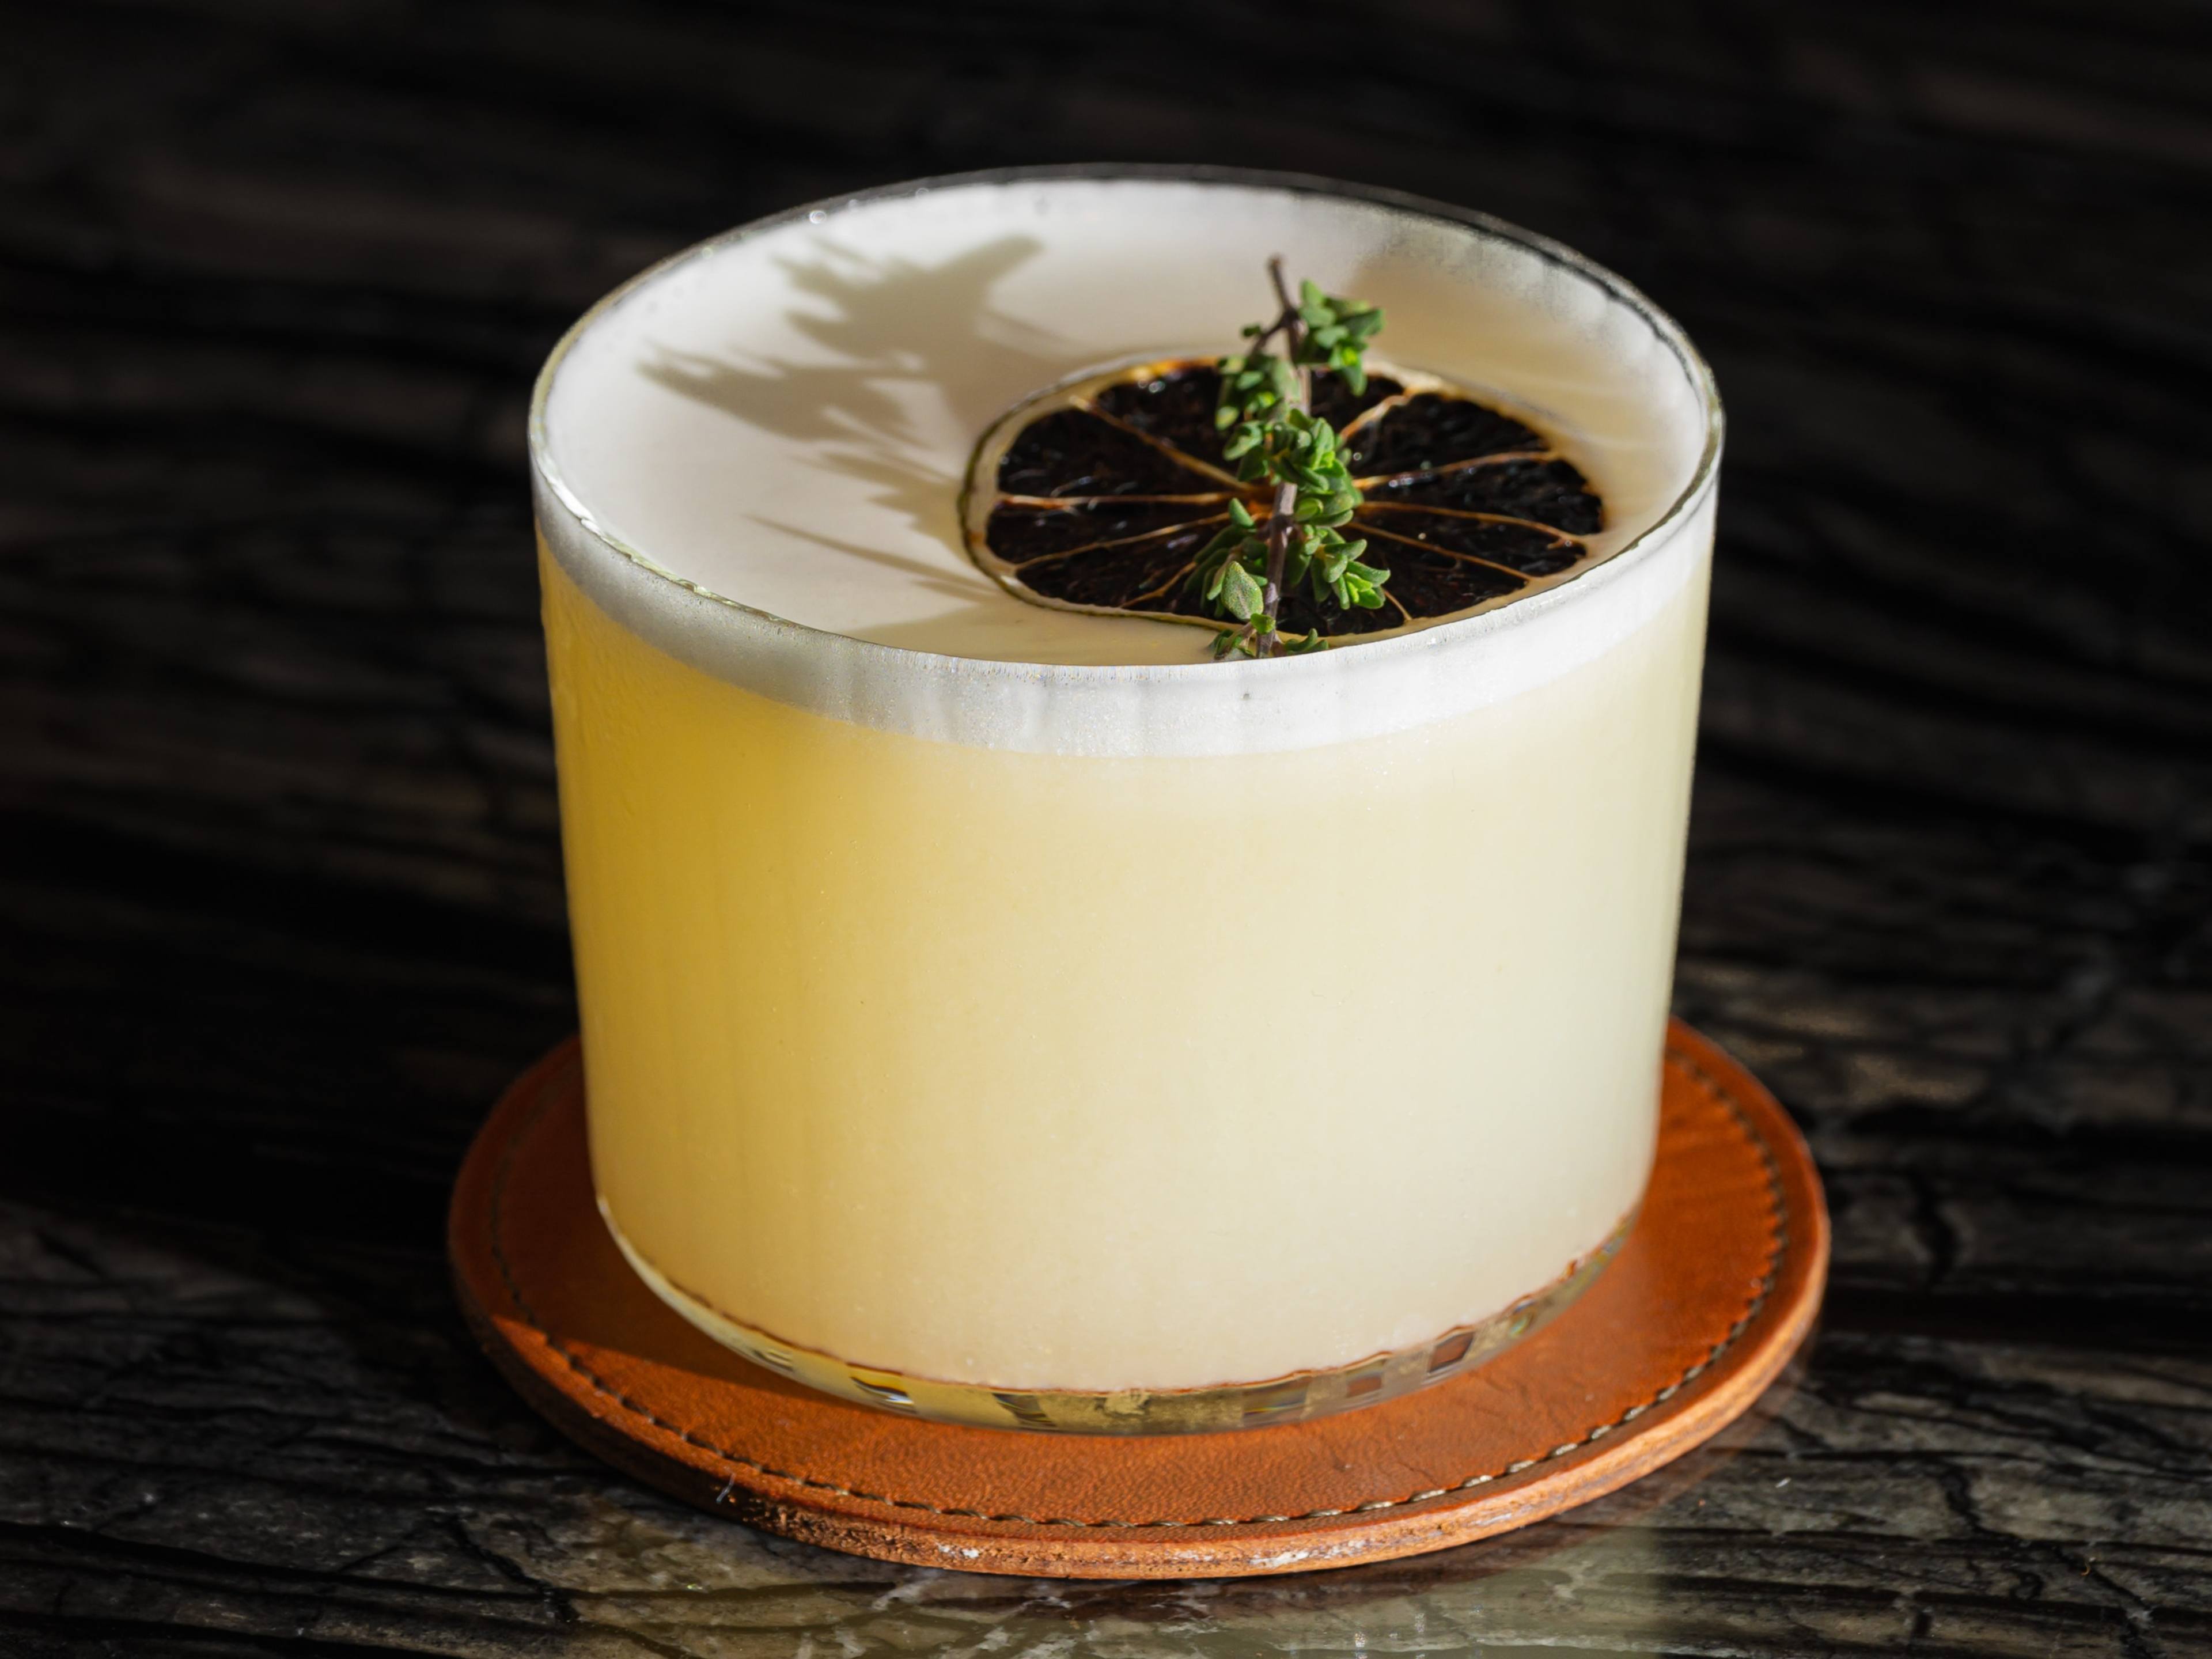 Andiron margarita with a fluffy rim of egg white foam topped with a dehydrated lime slice